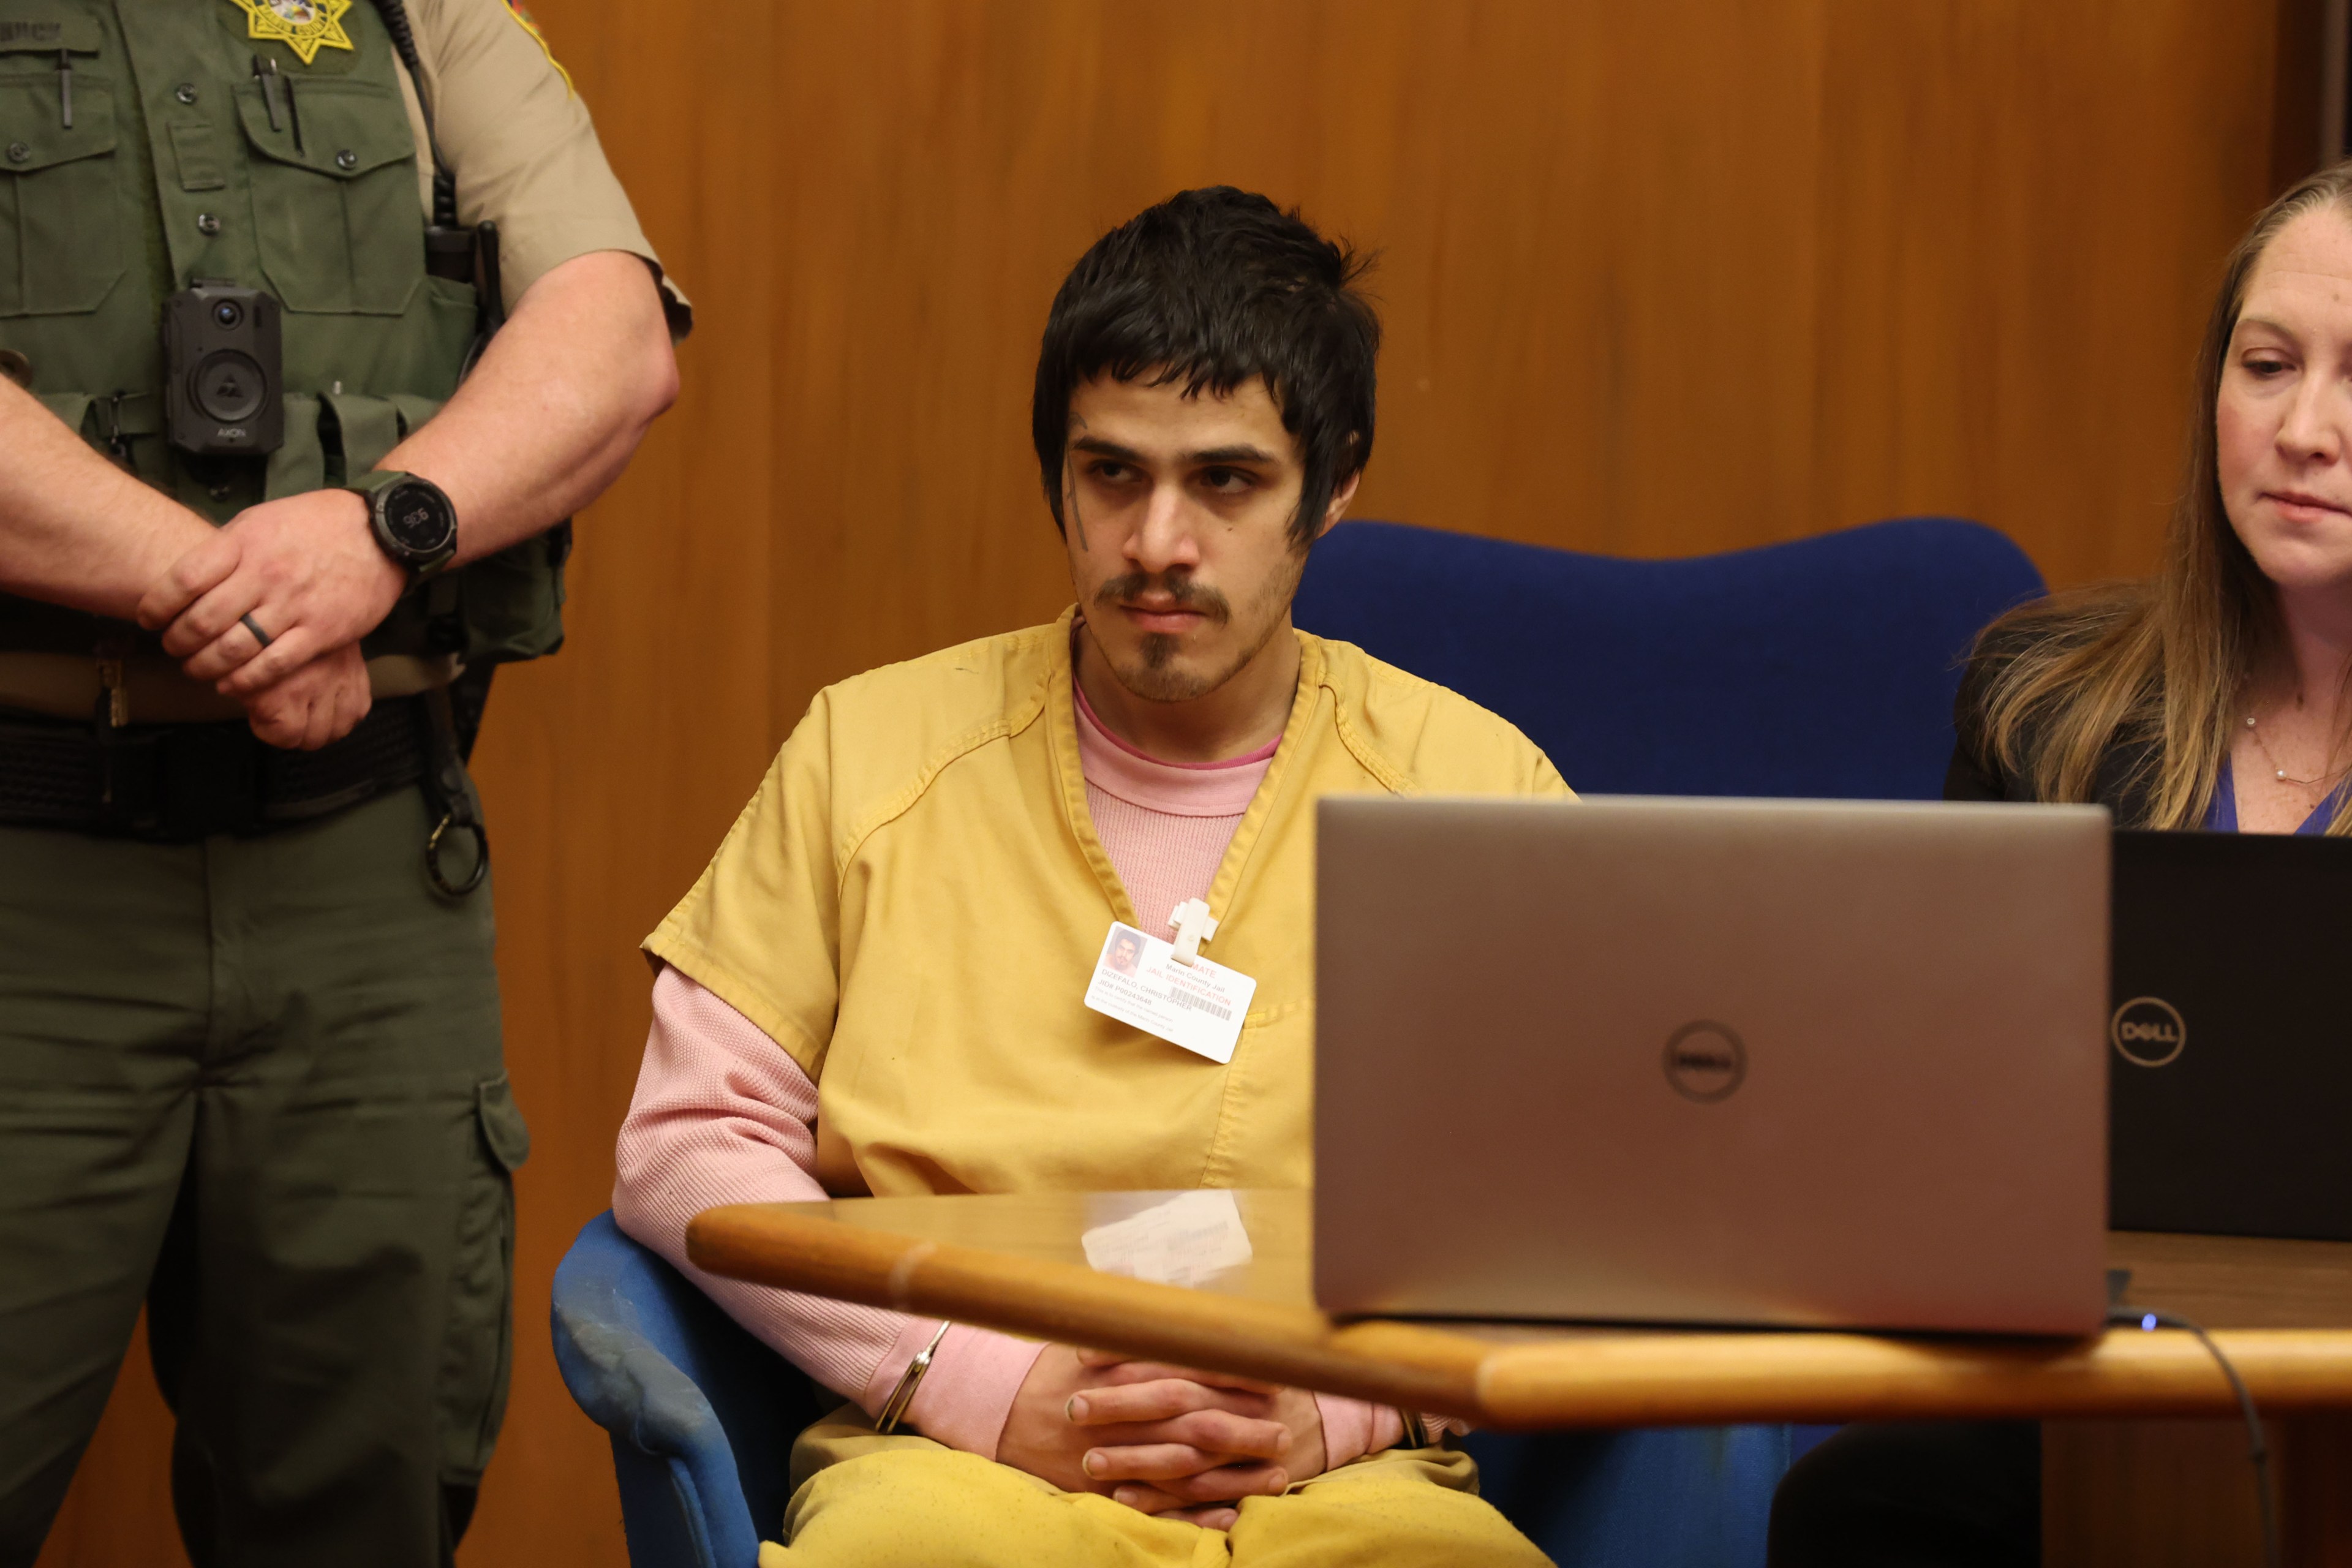 A person in a yellow jumpsuit sits by a laptop, flanked by an officer and another individual.